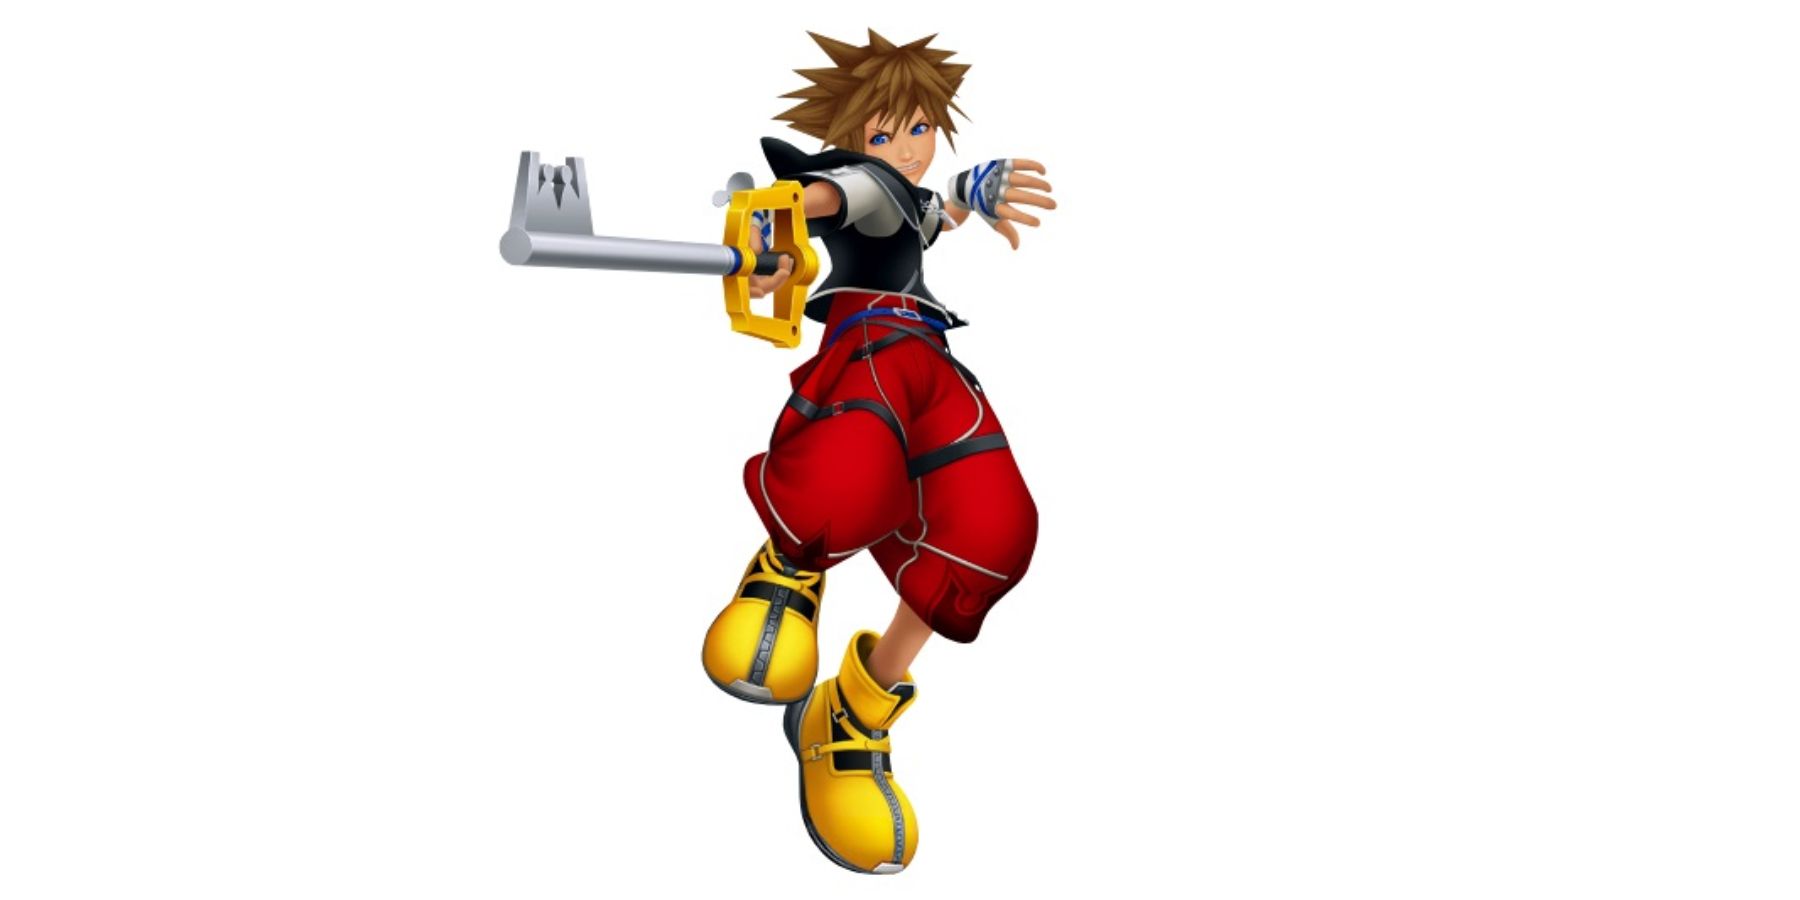 Sora in his Limit Form outfit in Kingdom Hearts 2